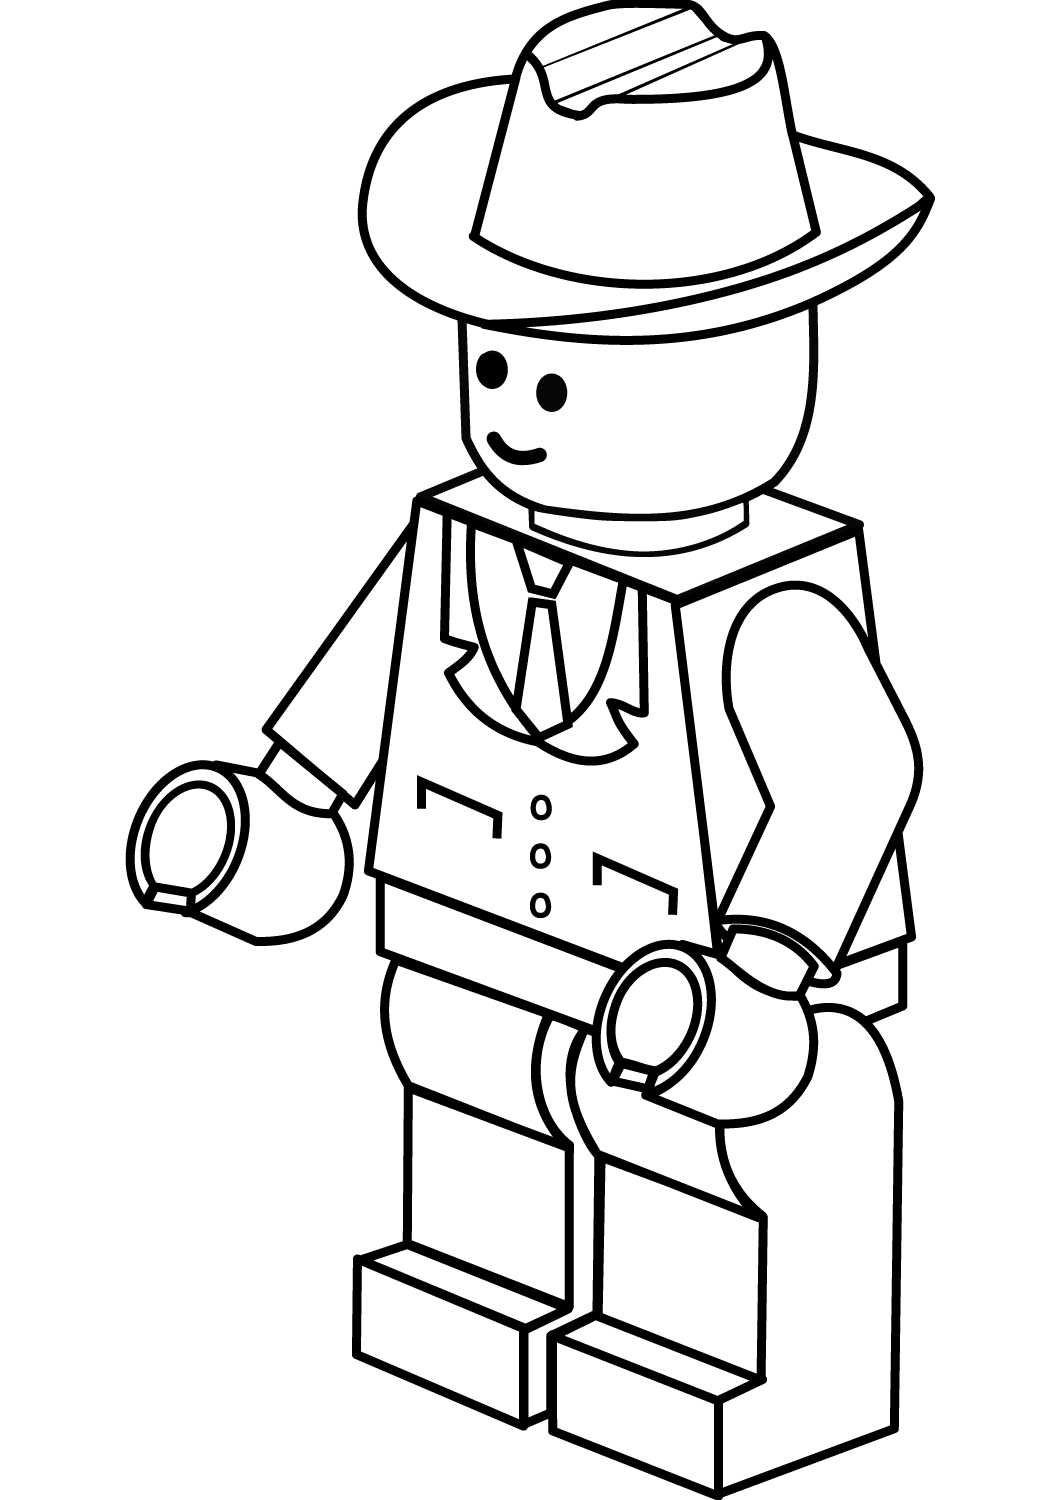 Lego Man Coloring Pages Free Lego Coloring Pages Lego Coloring Lego Coloring Sheet